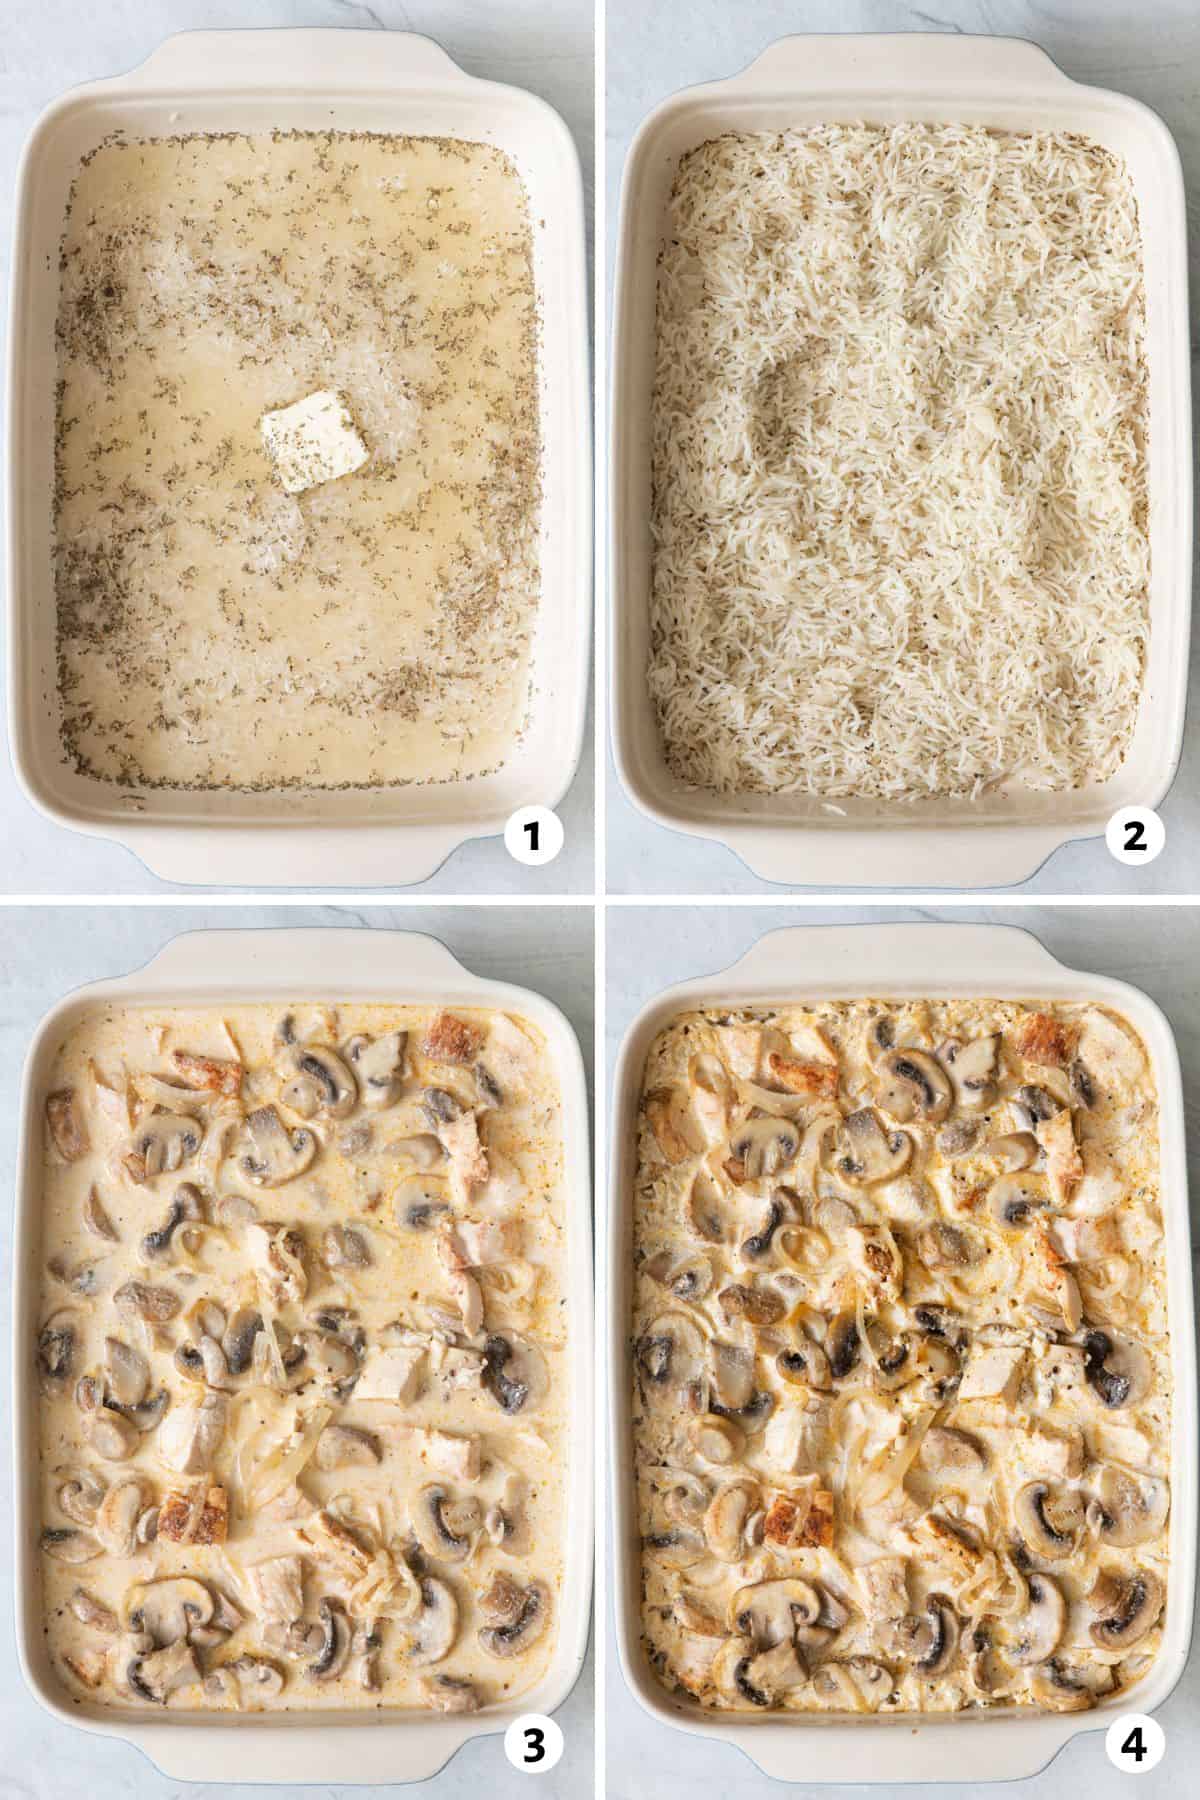 4 image collage of making recipe in a large rectangle baking dish: 1 rice with water before being baked, 2 rice after being baked, 3 mushroom and chicken mixture mixed in, and 4 after being baked.